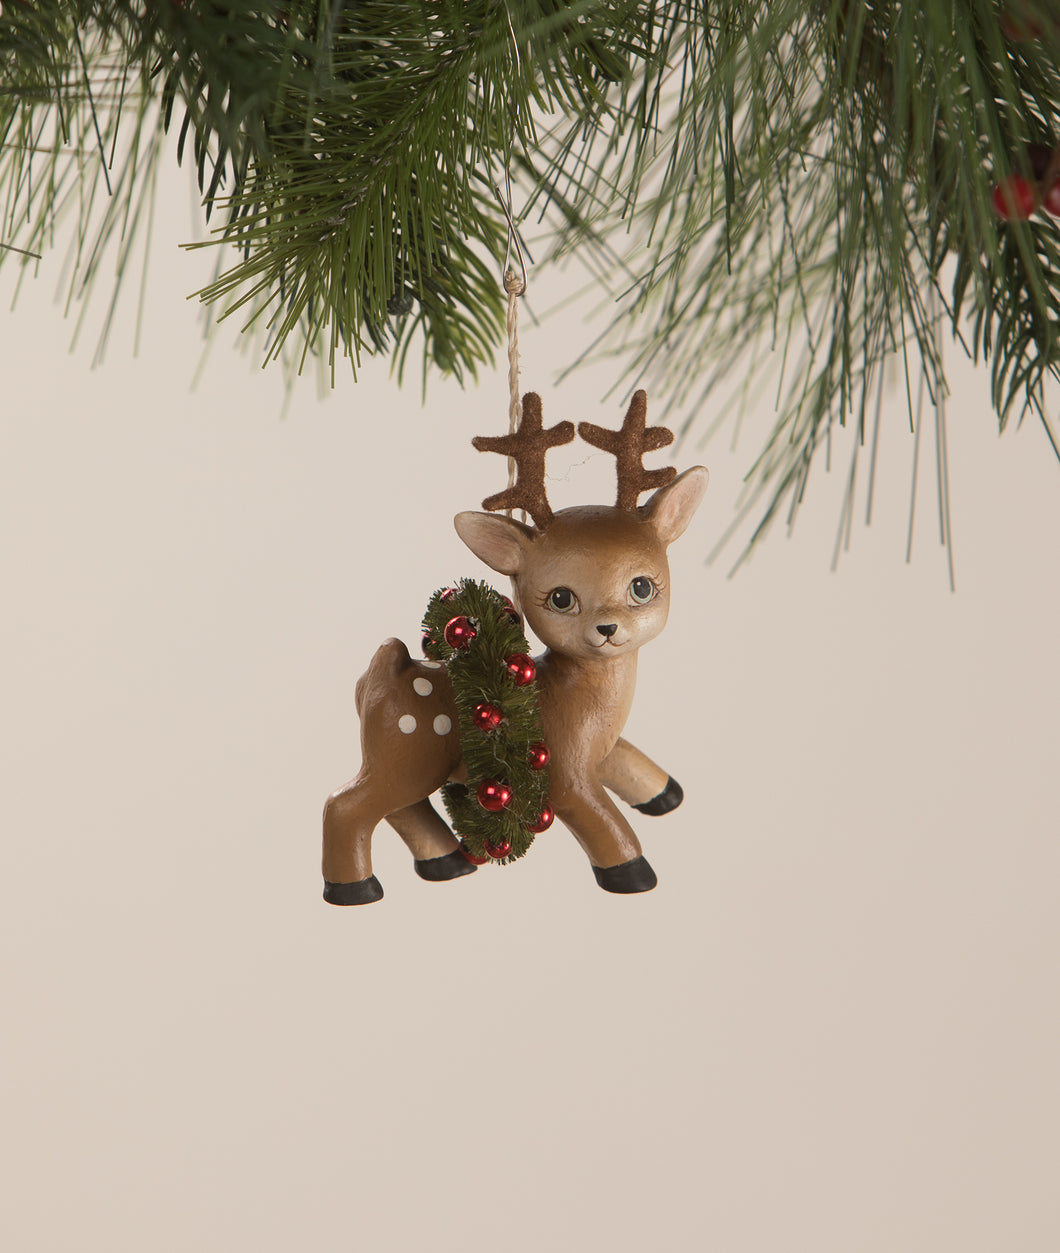 TD1185 - Retro Reindeer with Wreath Ornament (6743947575362)